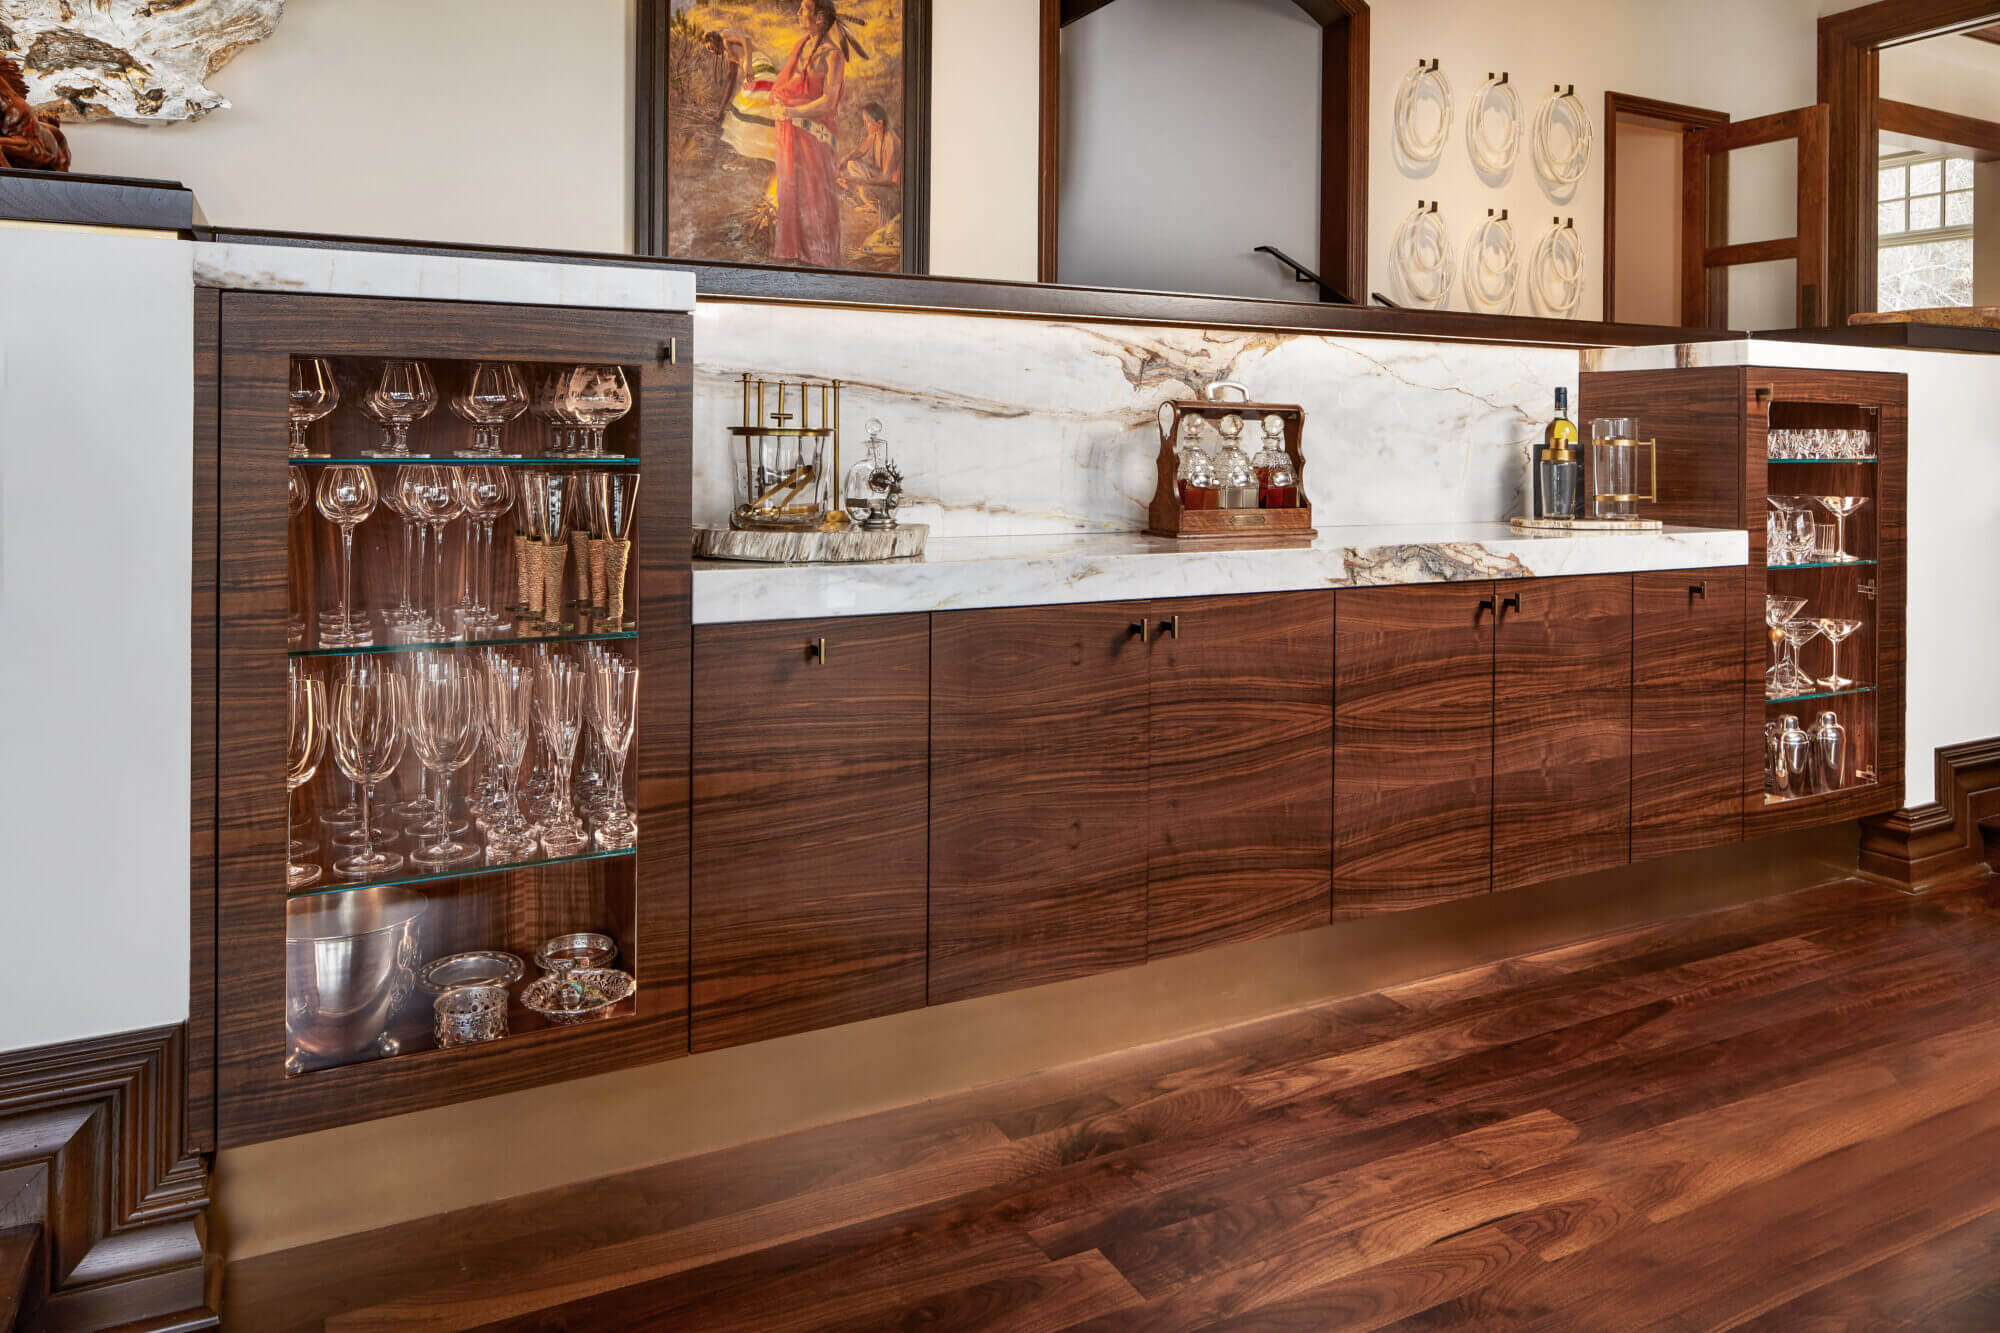 A bar in a kitchen with a wooden floor.